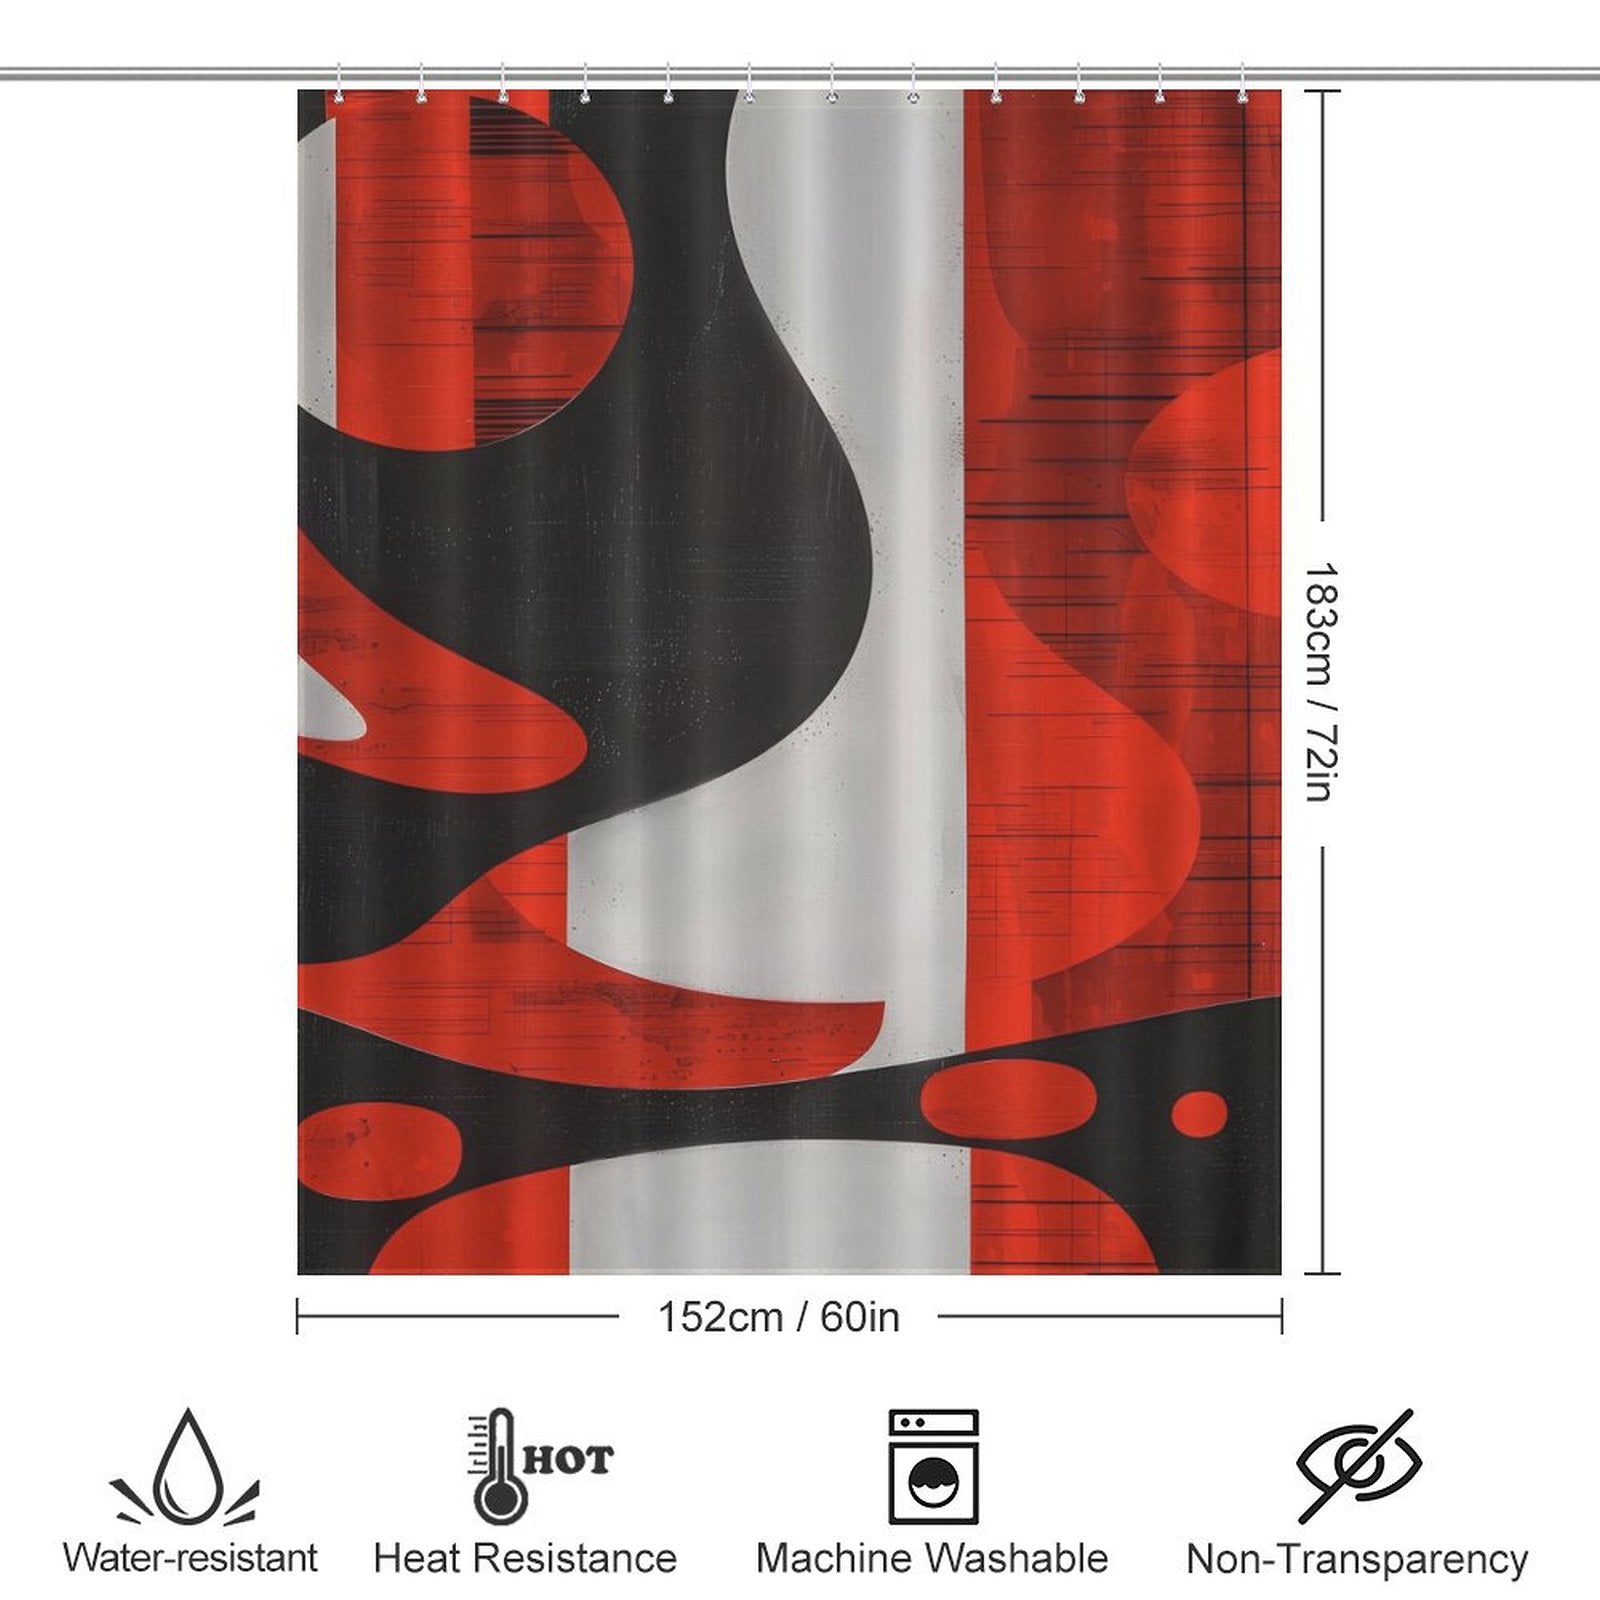 The Mid Century Modern Geometric Art Minimalist Grey Red and Black Abstract Shower Curtain-Cottoncat by Cotton Cat boasts a striking black, red, and white design. Measuring 152 cm x 183 cm, it combines functionality with flair, offering water and heat resistance as well as machine washability. The non-transparent material ensures privacy while adding a touch of geometric art to your bathroom.